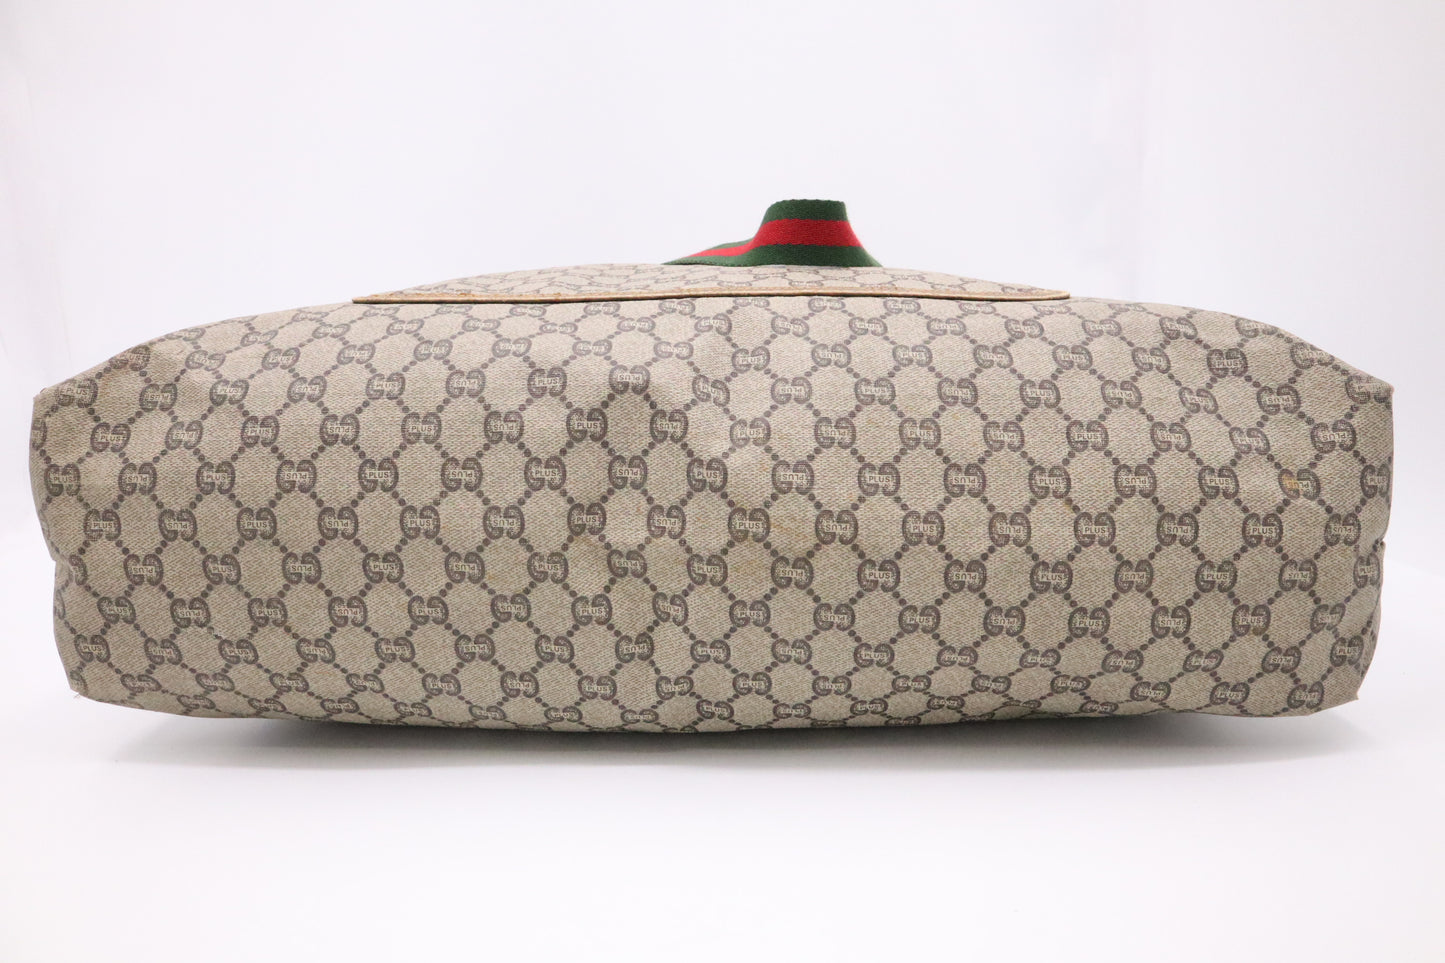 Gucci Plus Travel Tote in GG Coated Canvas